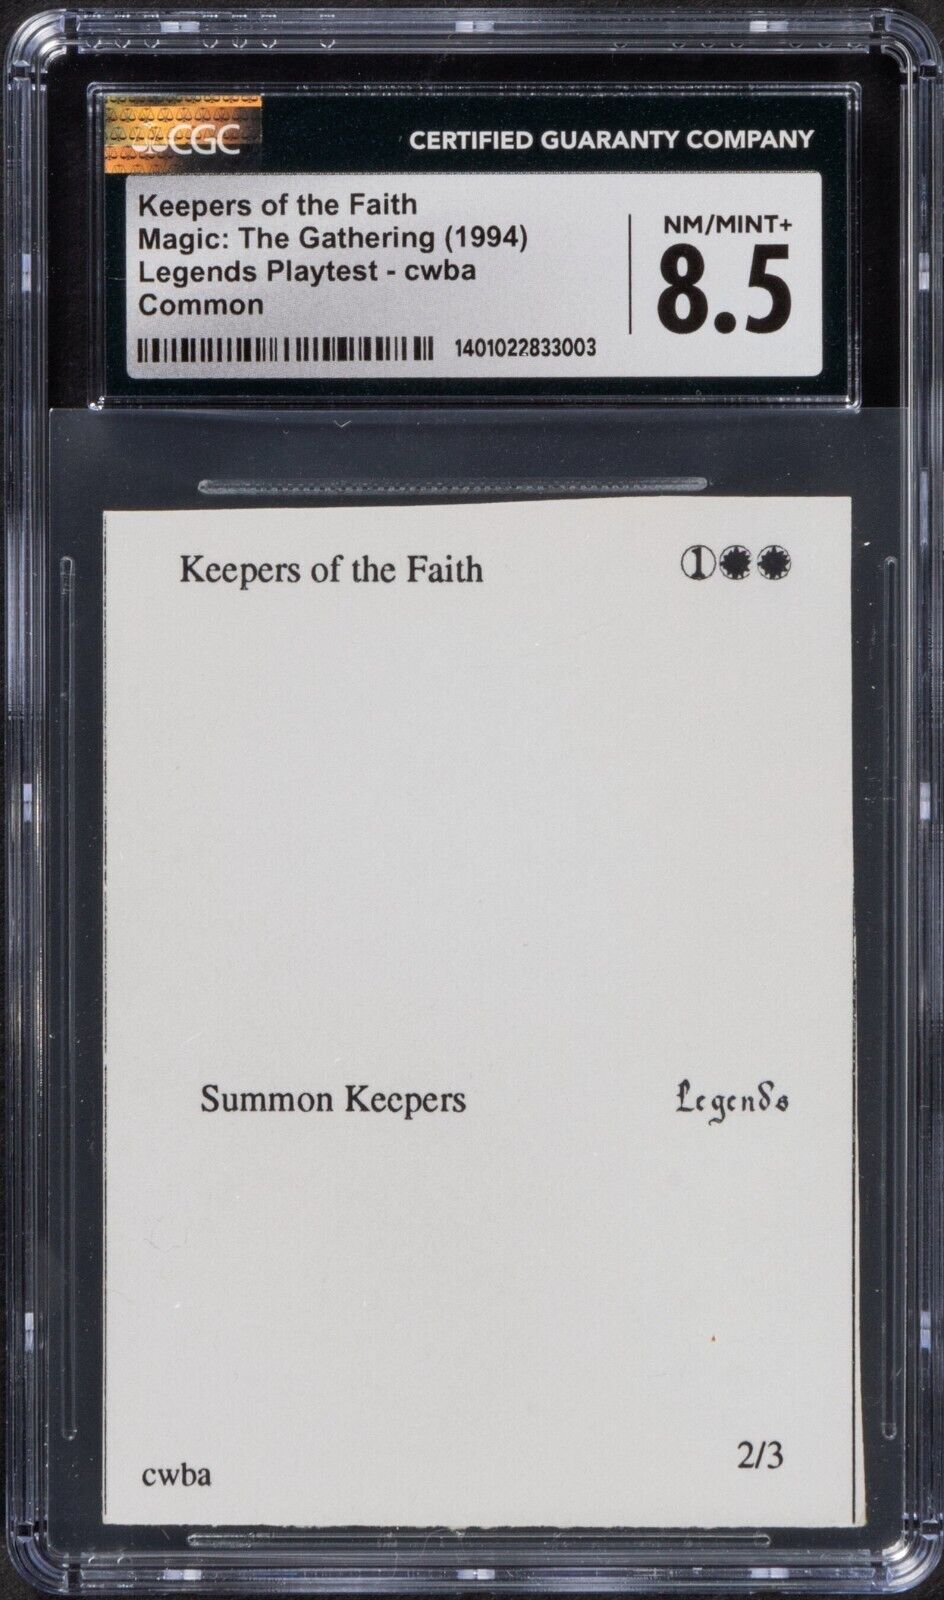 1994 Magic: The Gathering MTG Keepers of the Faith Legends Playtest Card CGC 8.5